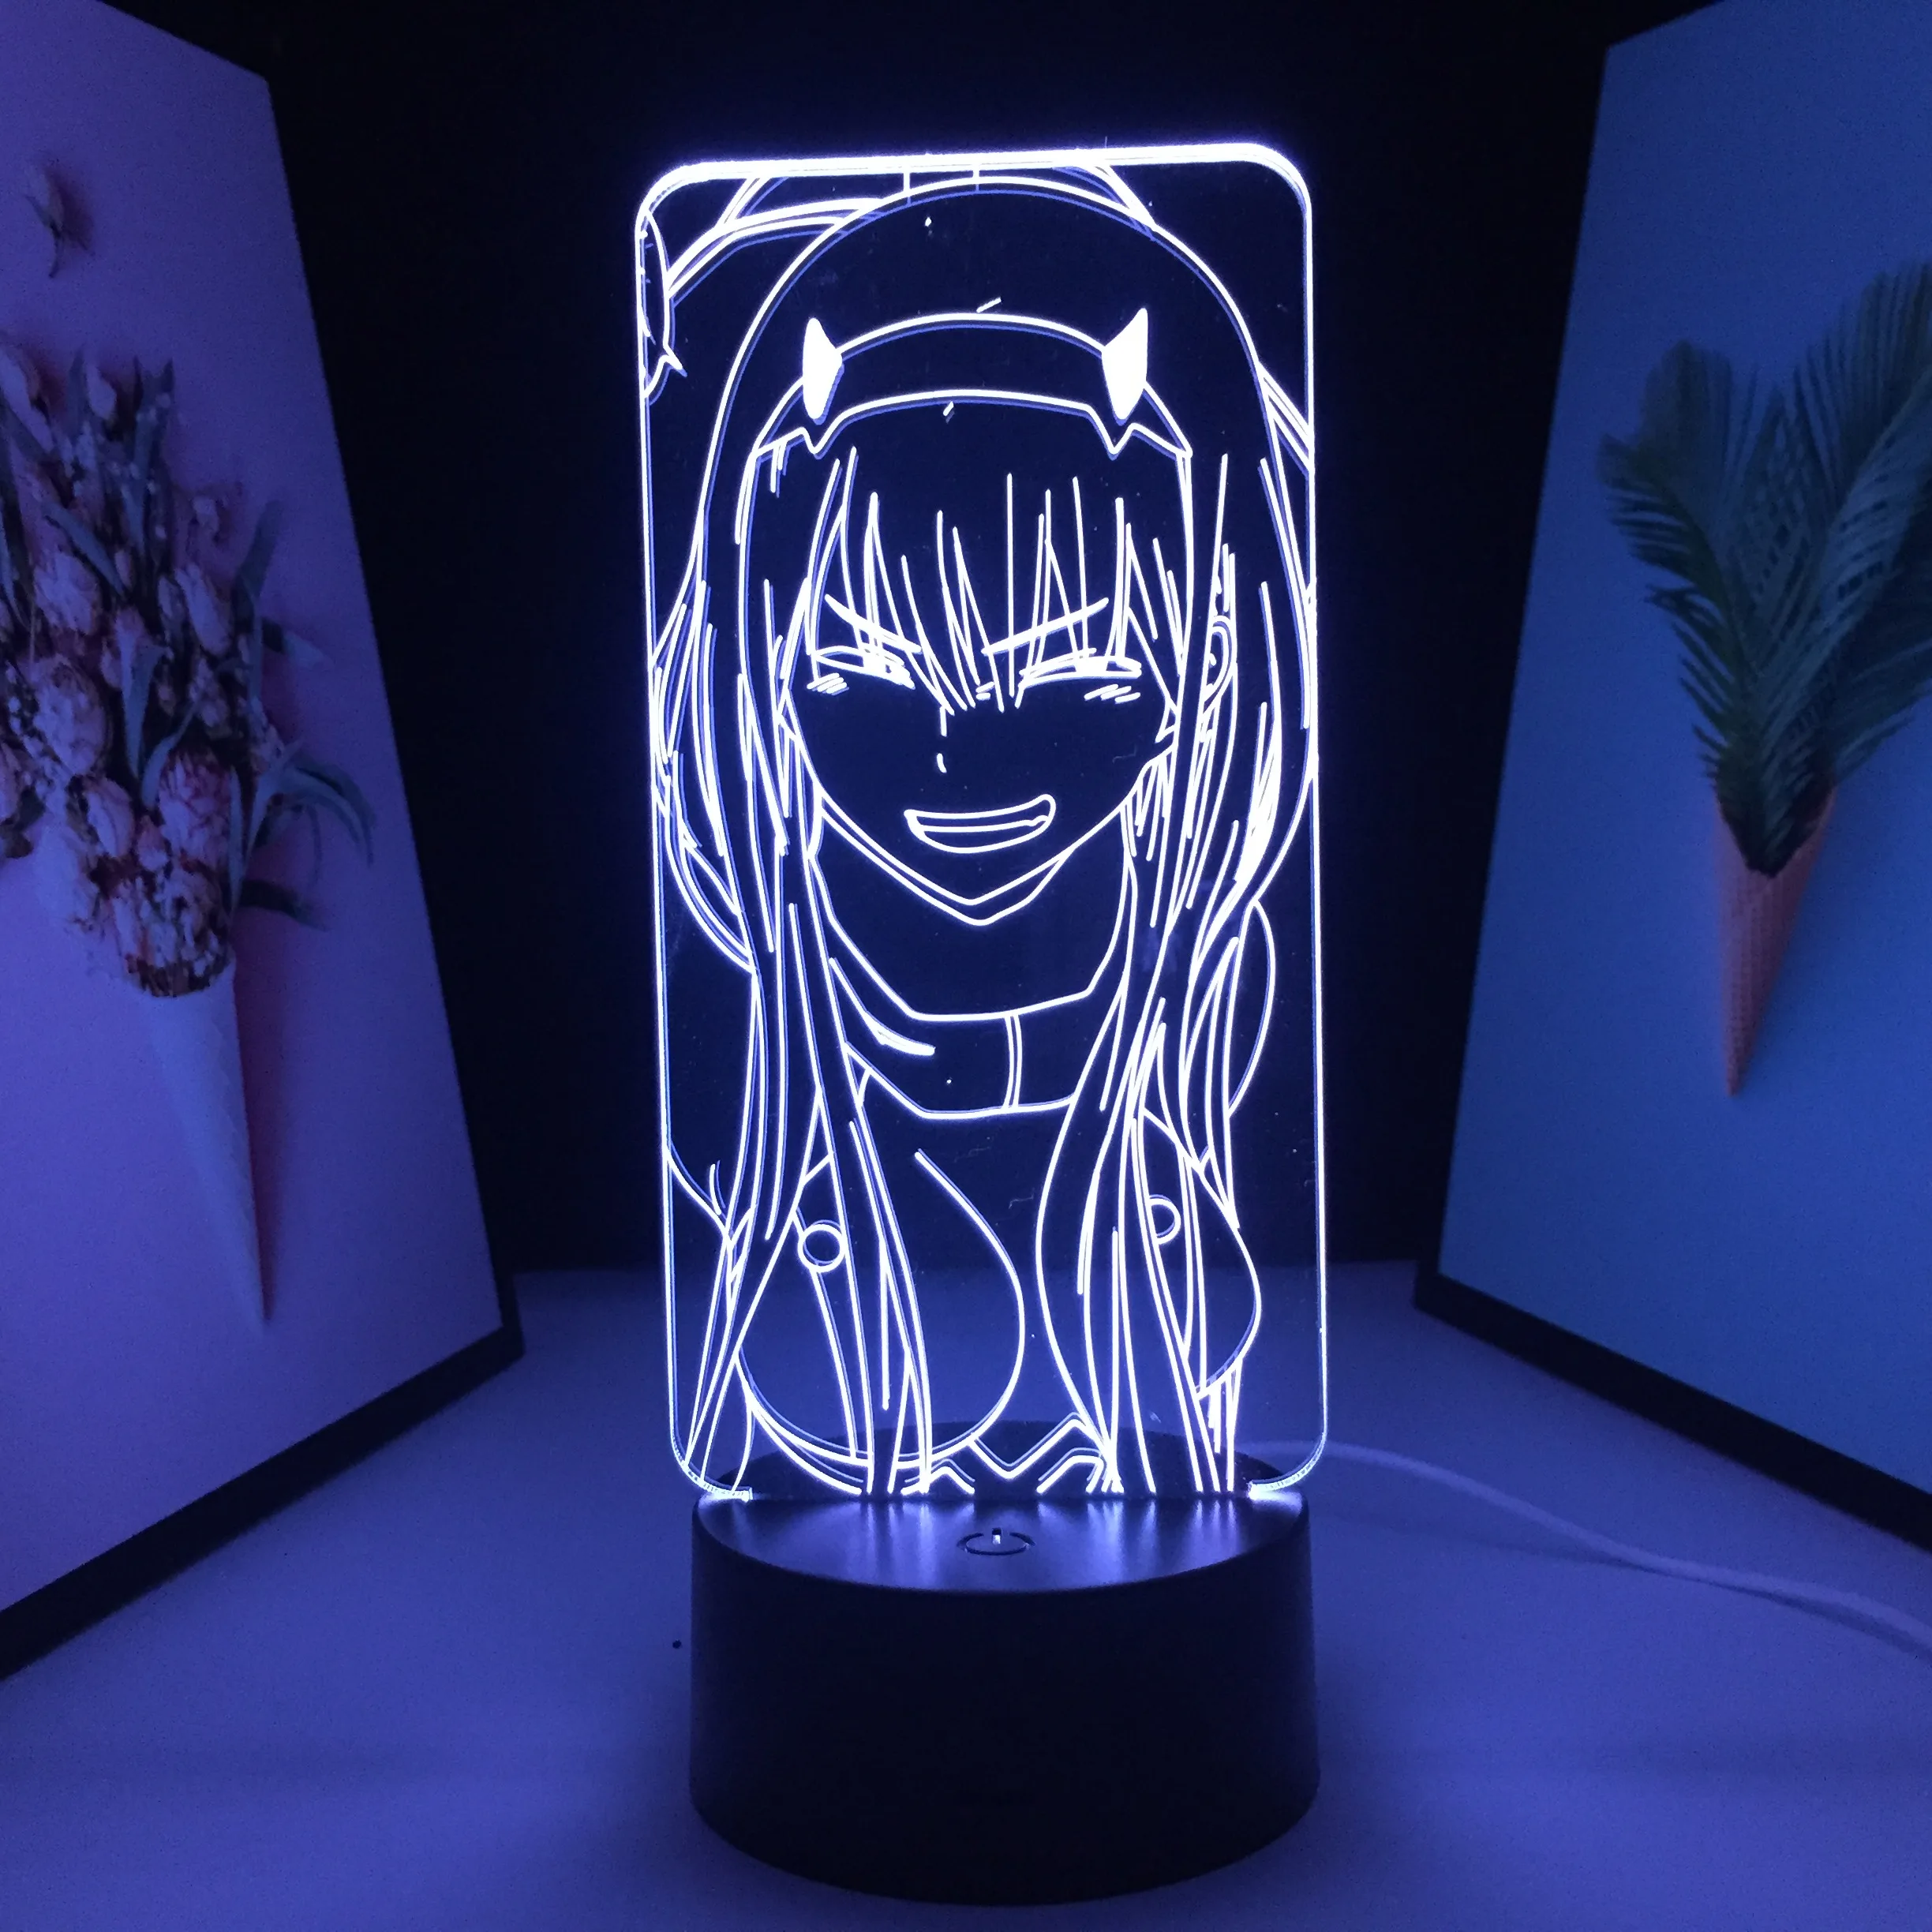 

Angry Girl 3D LED Lamp Anime Figure Black Base Visual Illusion 7 Color Changes With Remote Control for Home Decor Neon Light